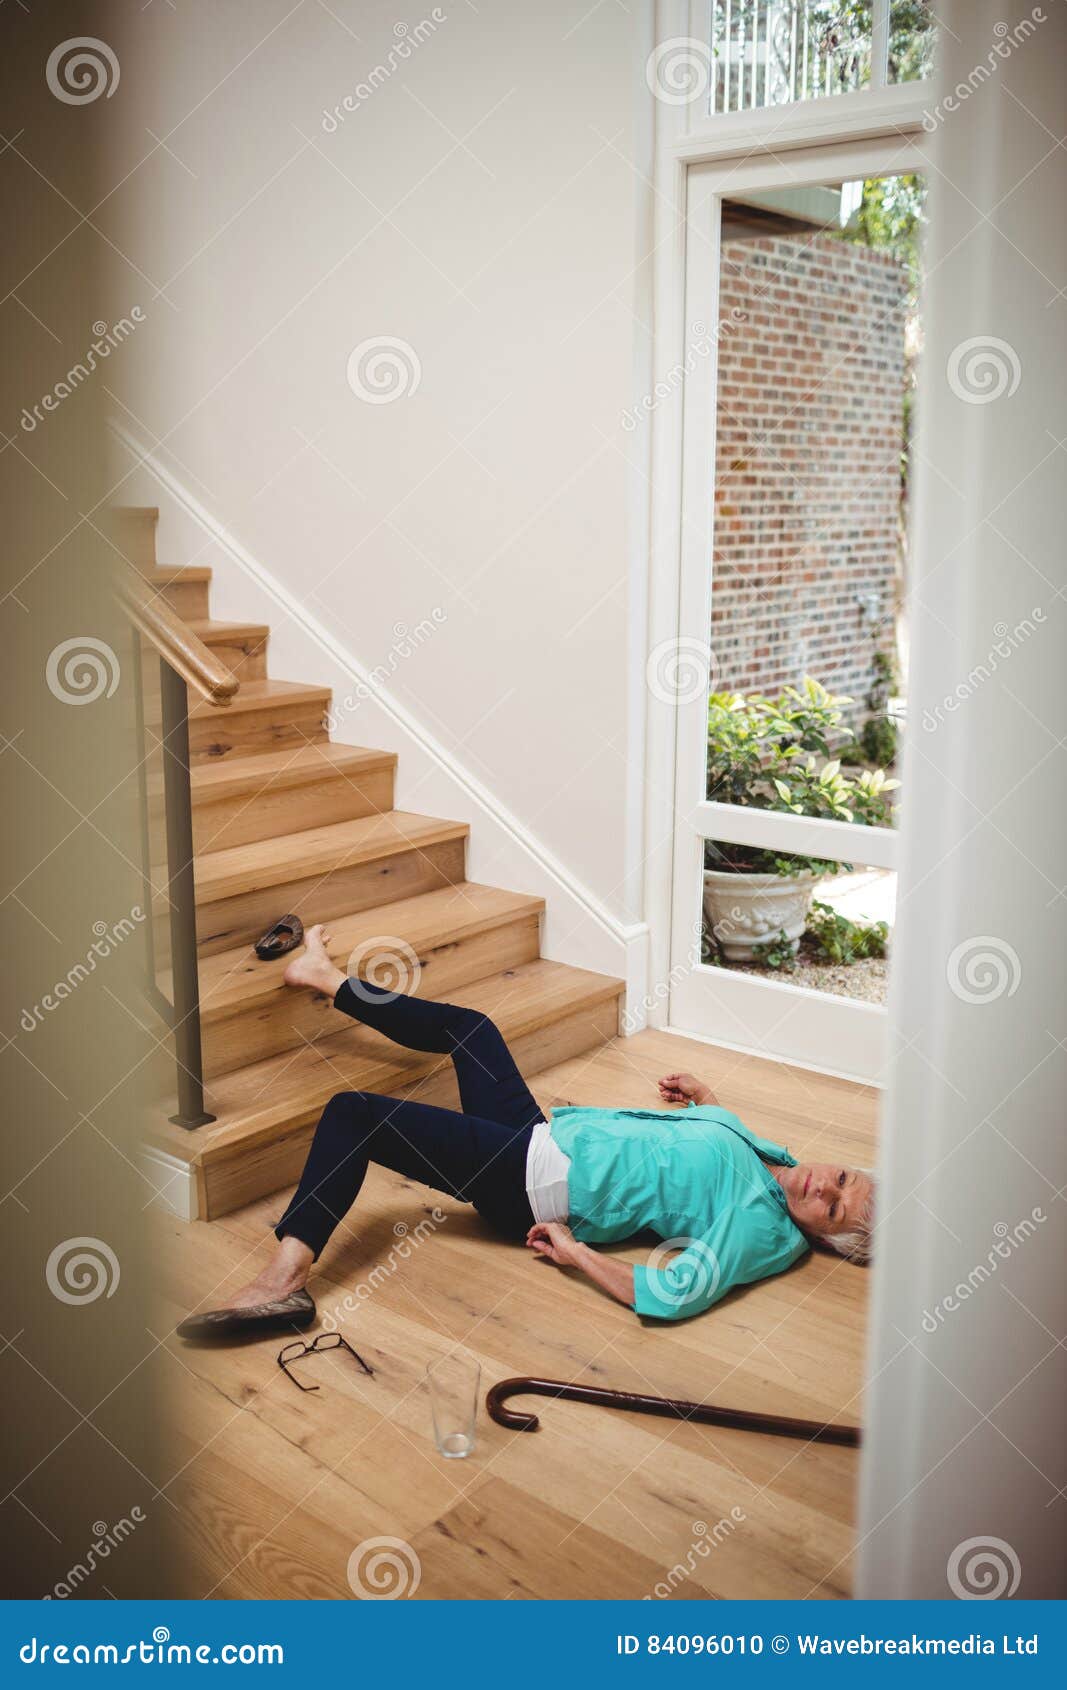 Senior Woman Fallen Down from Stairs Stock Photo - Image of people ...